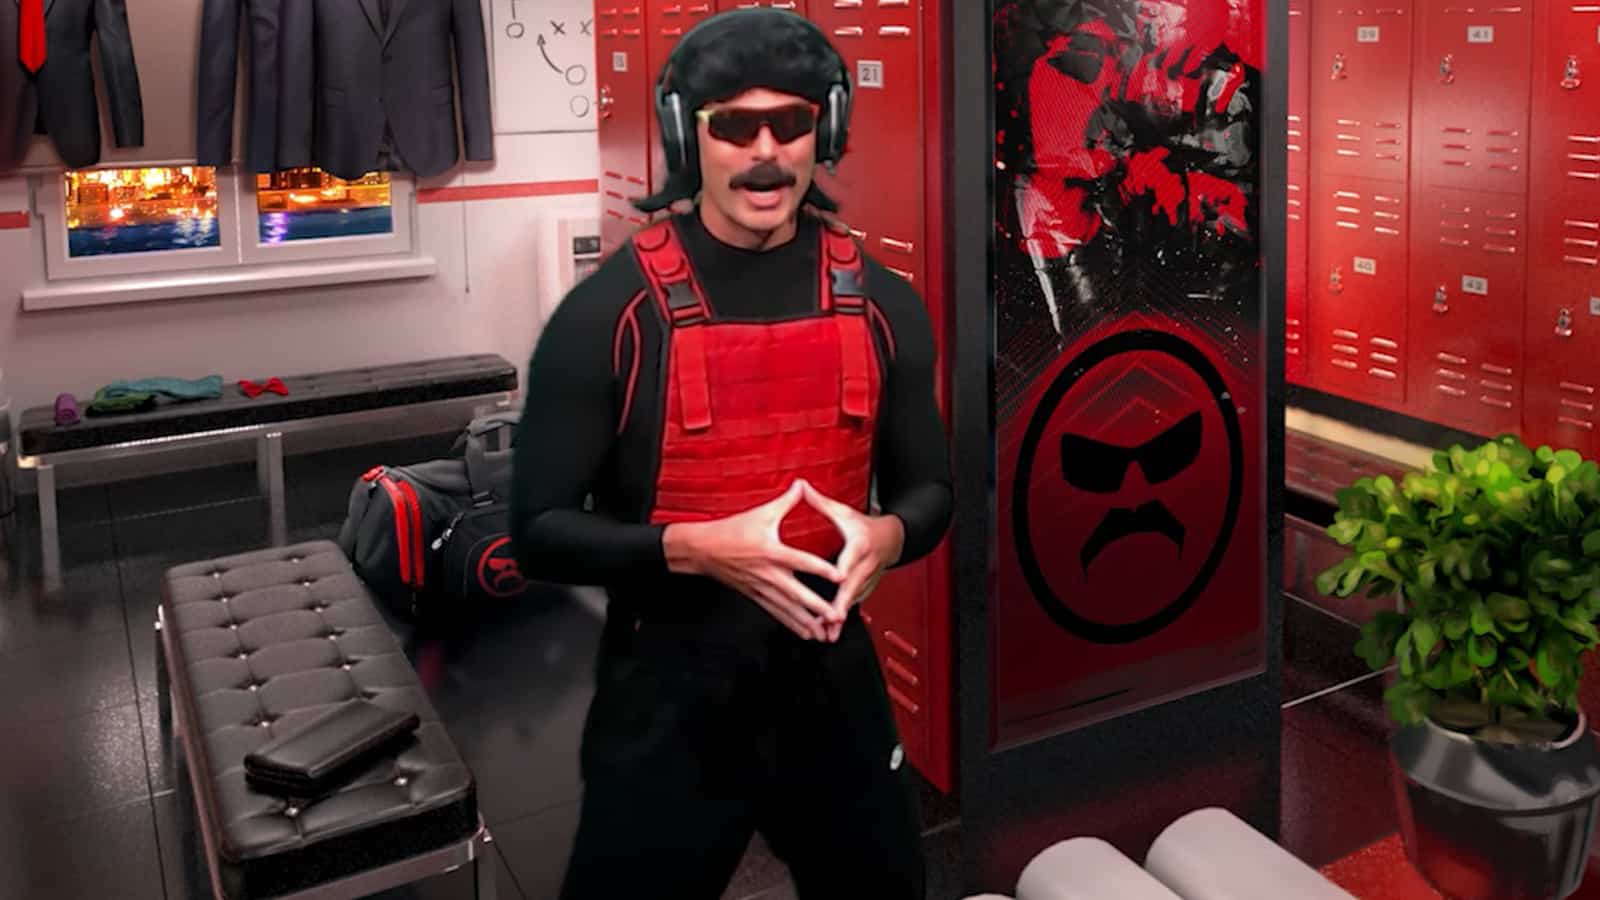 Dr Disrespect on virtual background.